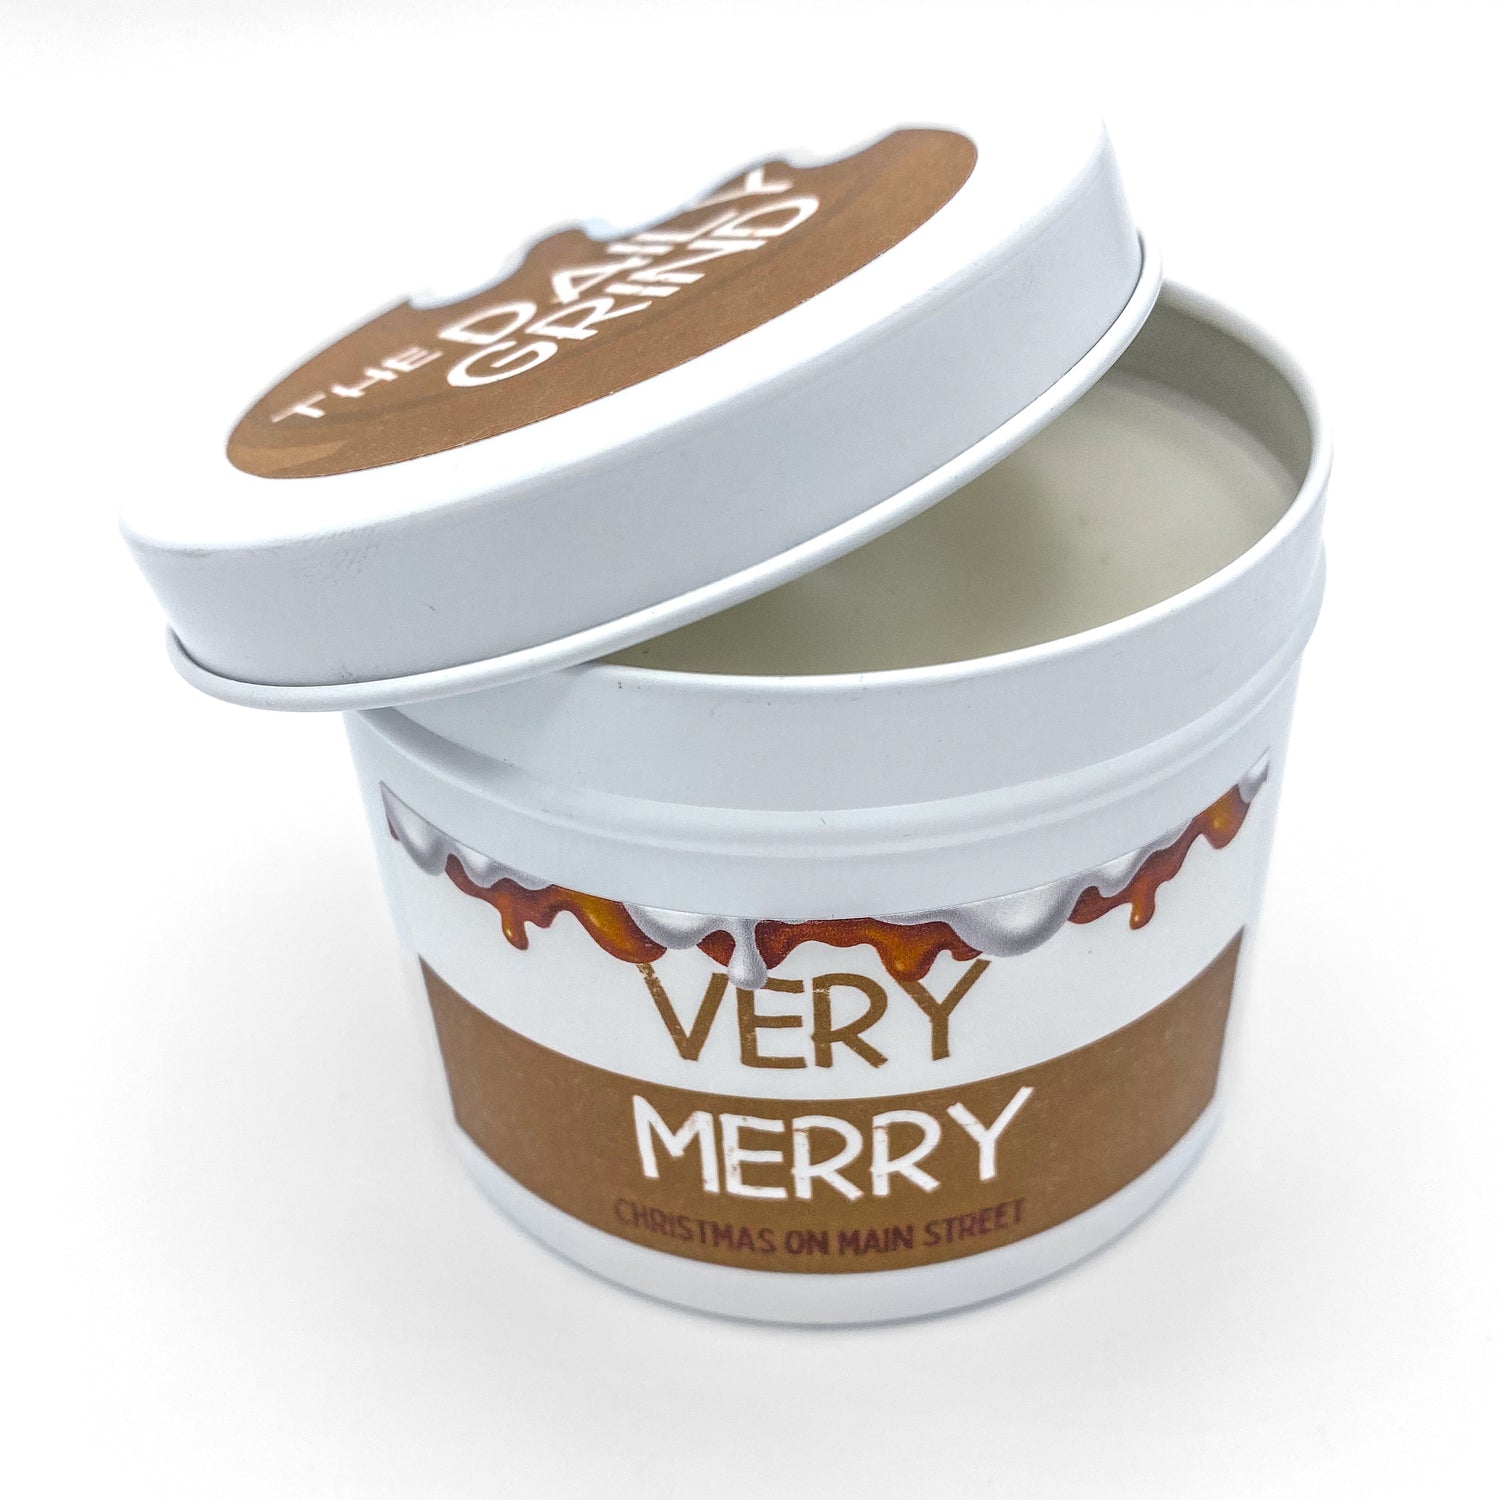 THE DAILY HOME | Very Merry Candle